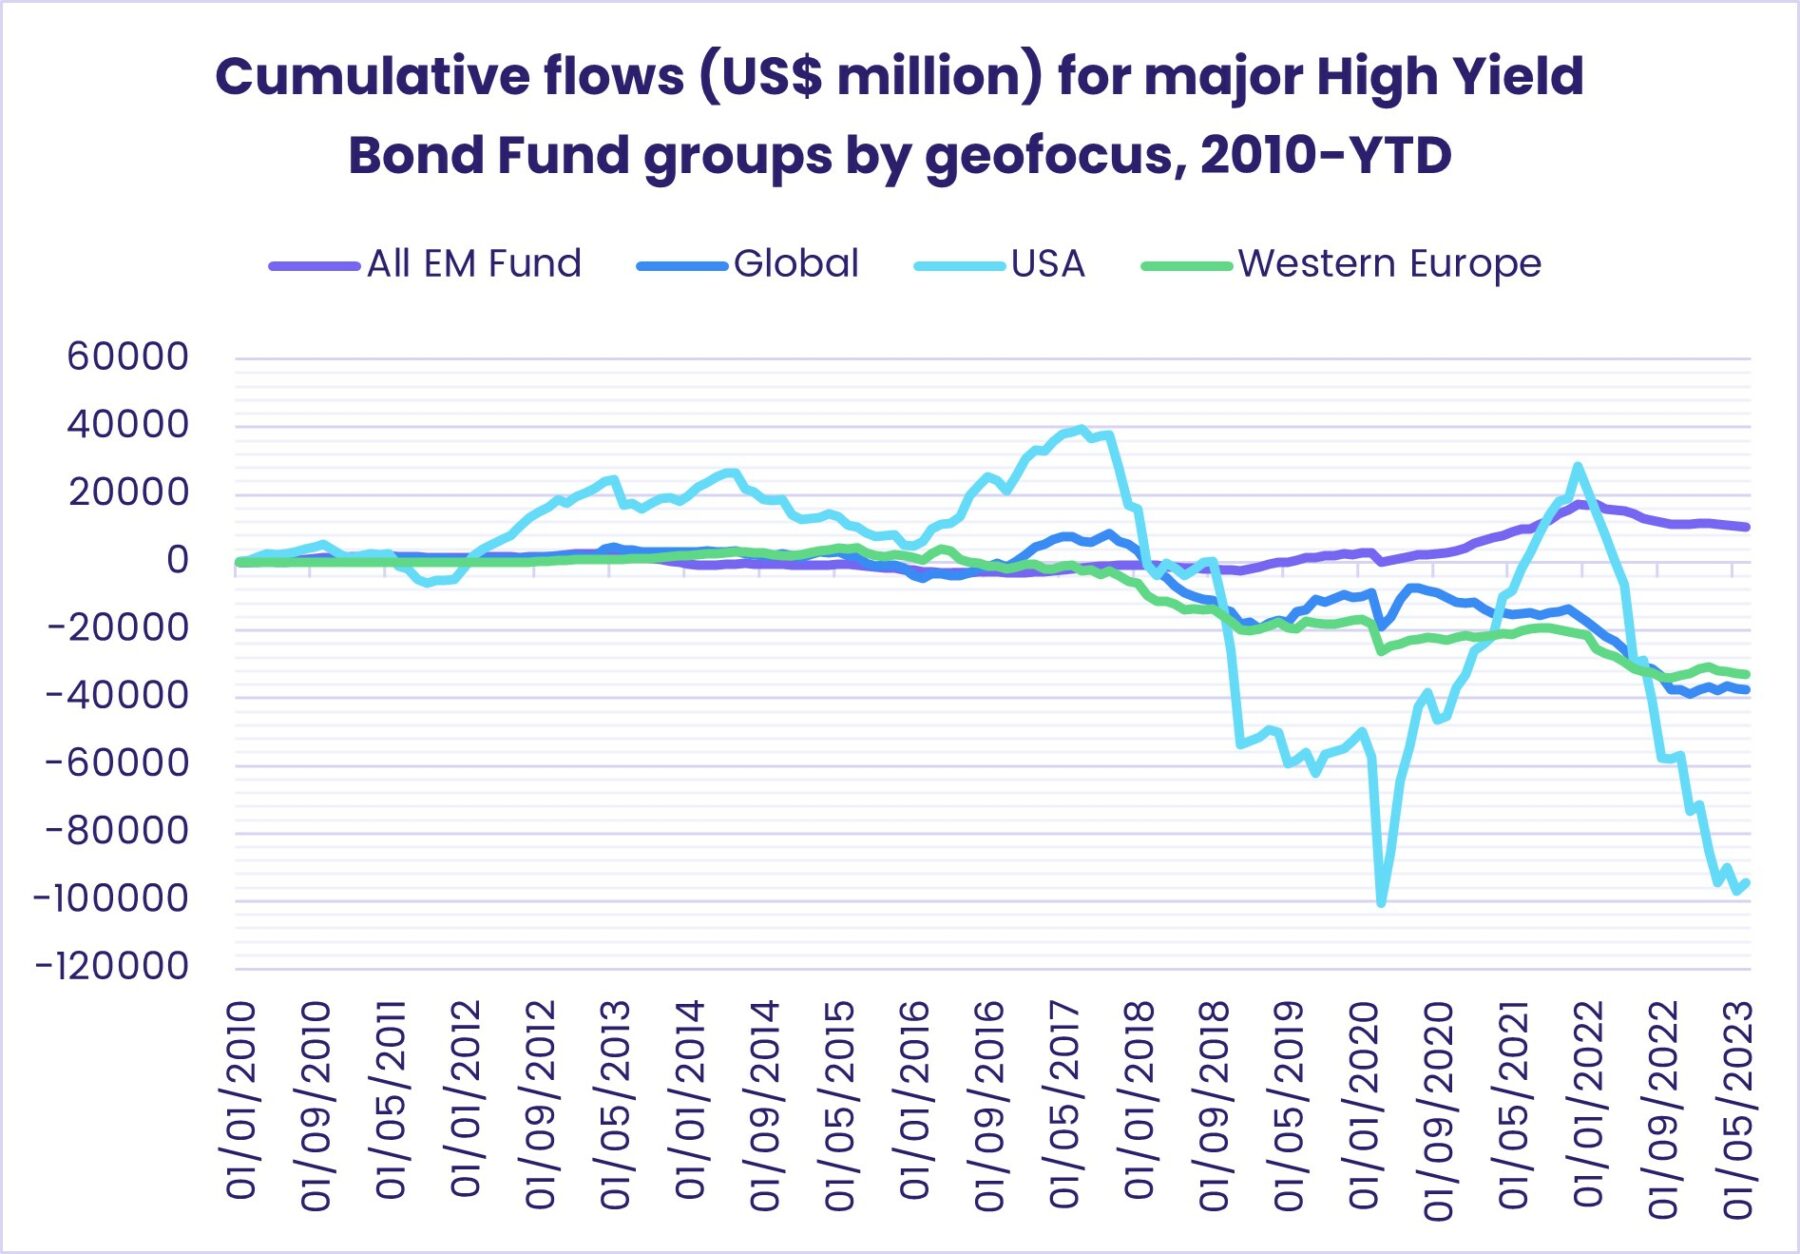 Image of a chart representing "Cumulative flows (US$ million) for major High Yield Bond Fund groups by geofocus, 2010-YTD"